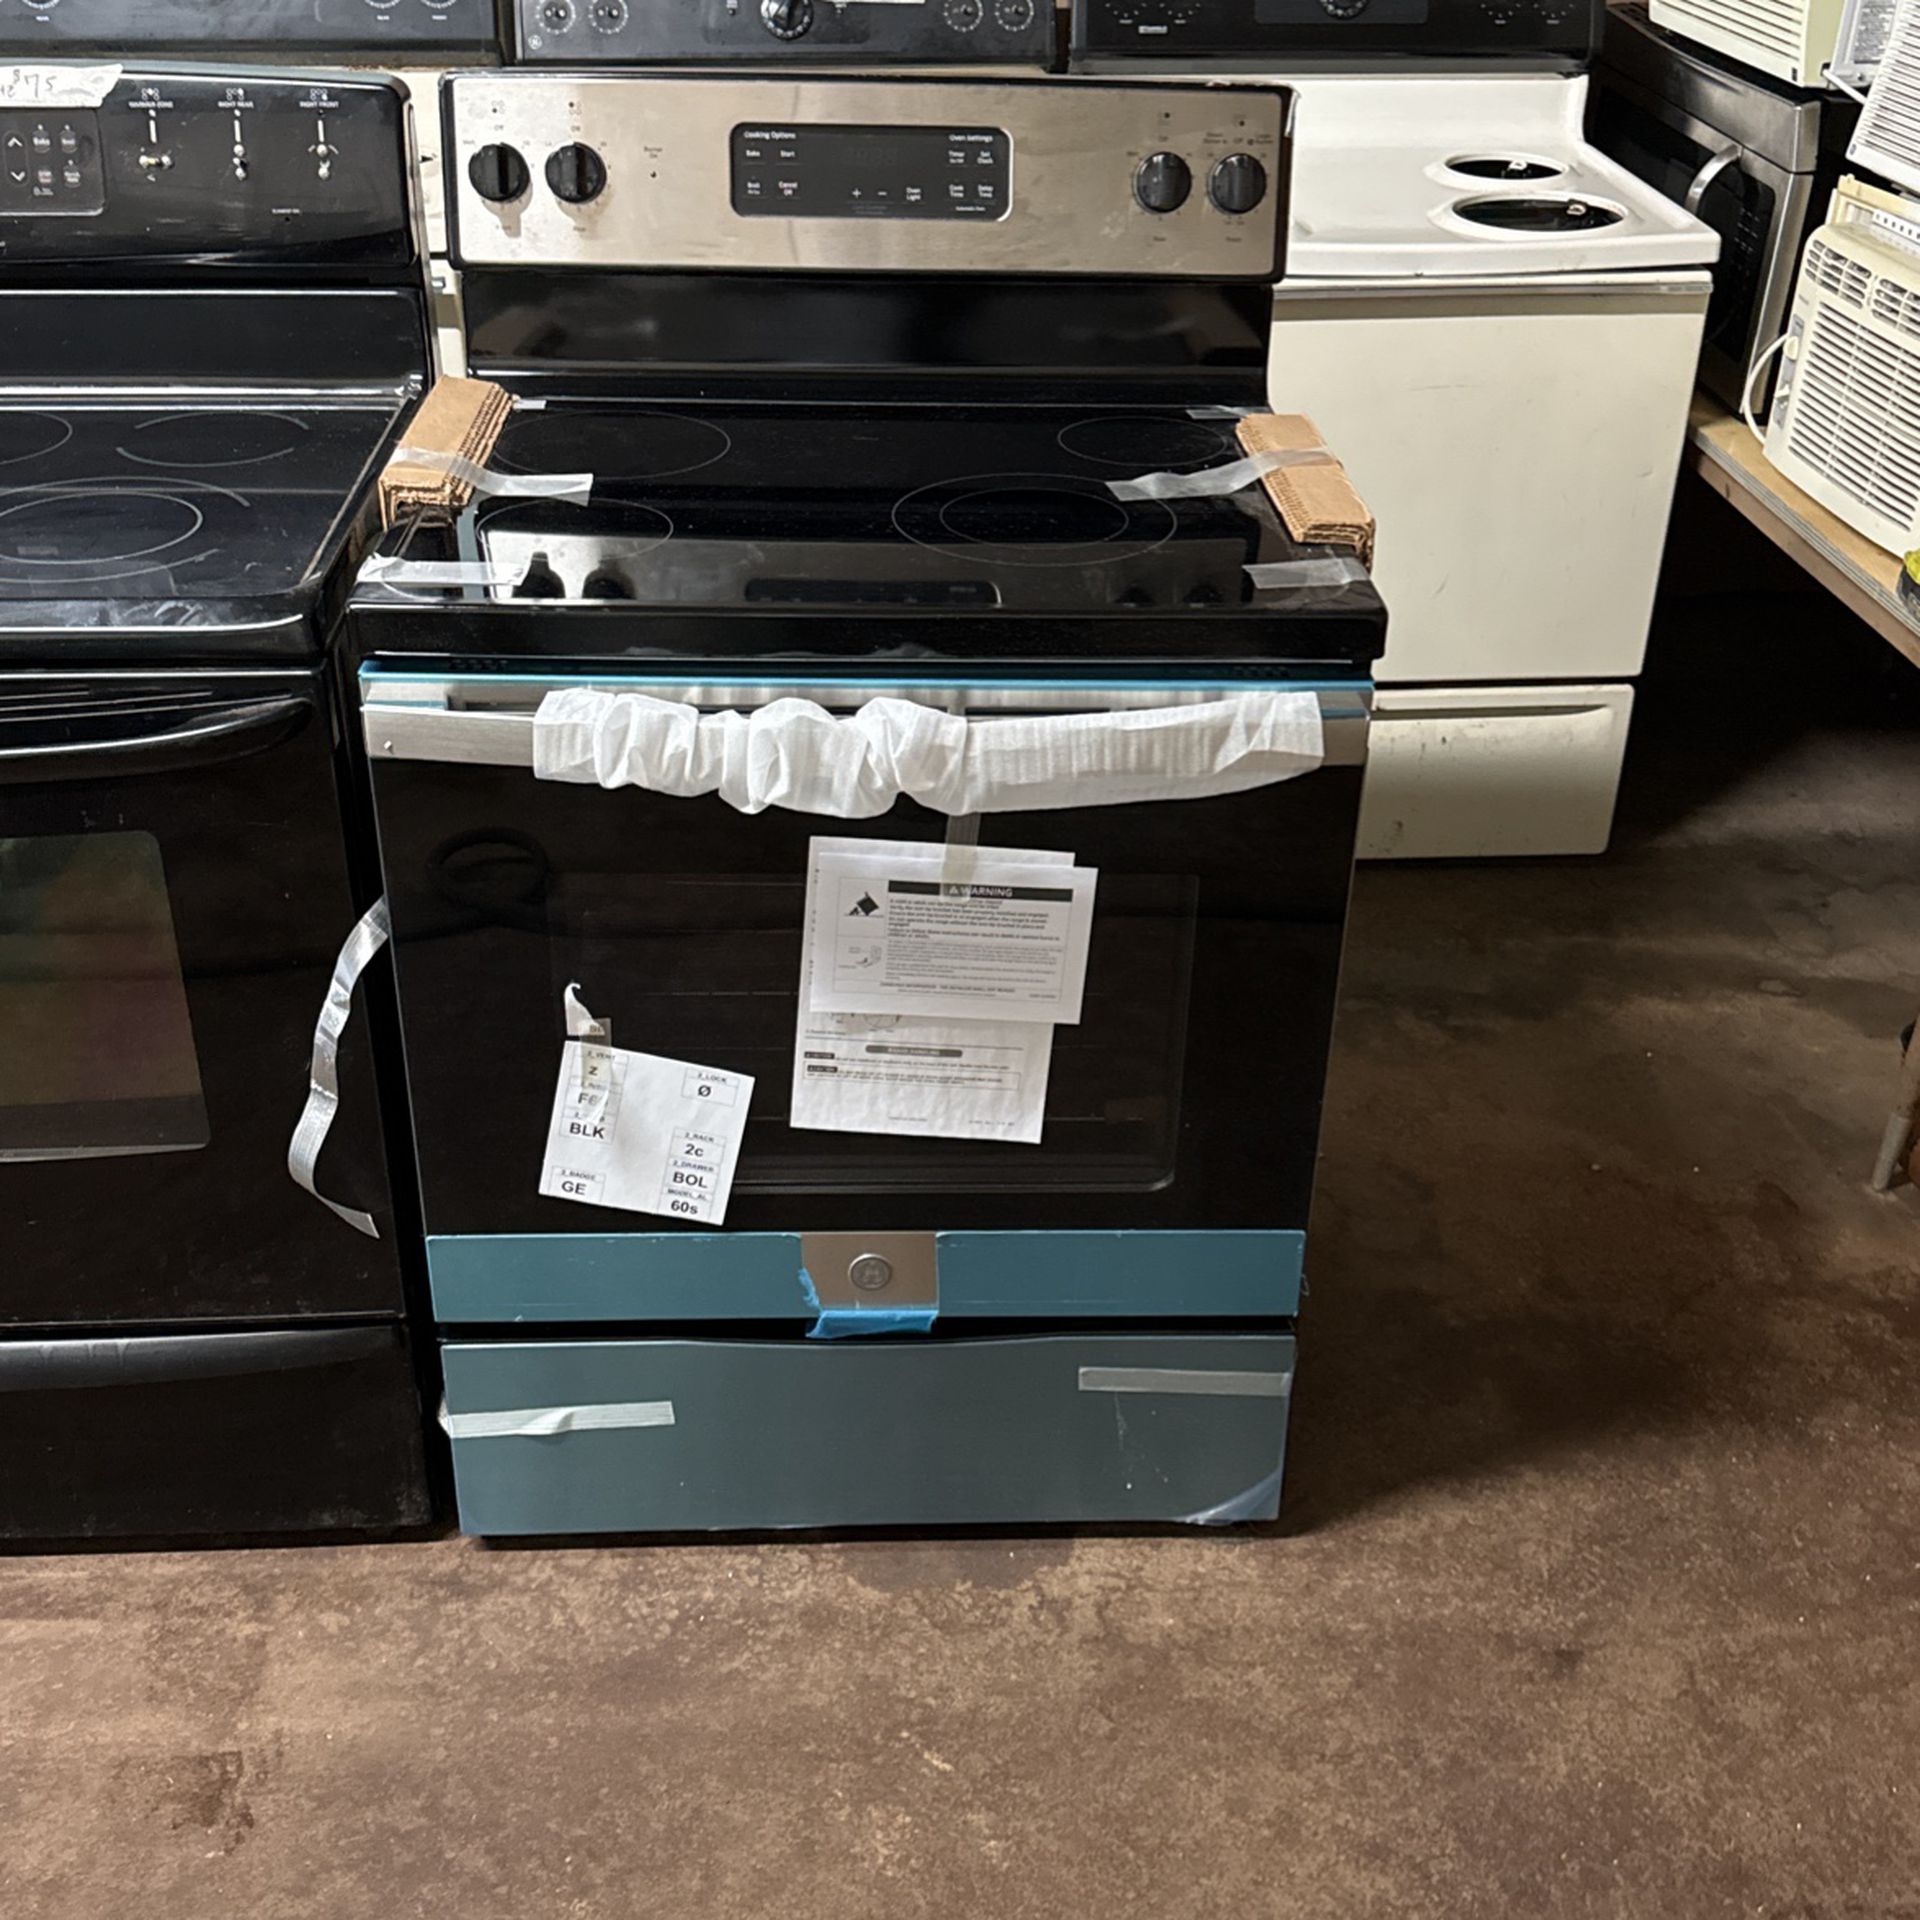 Brand New GE Electric Stove 